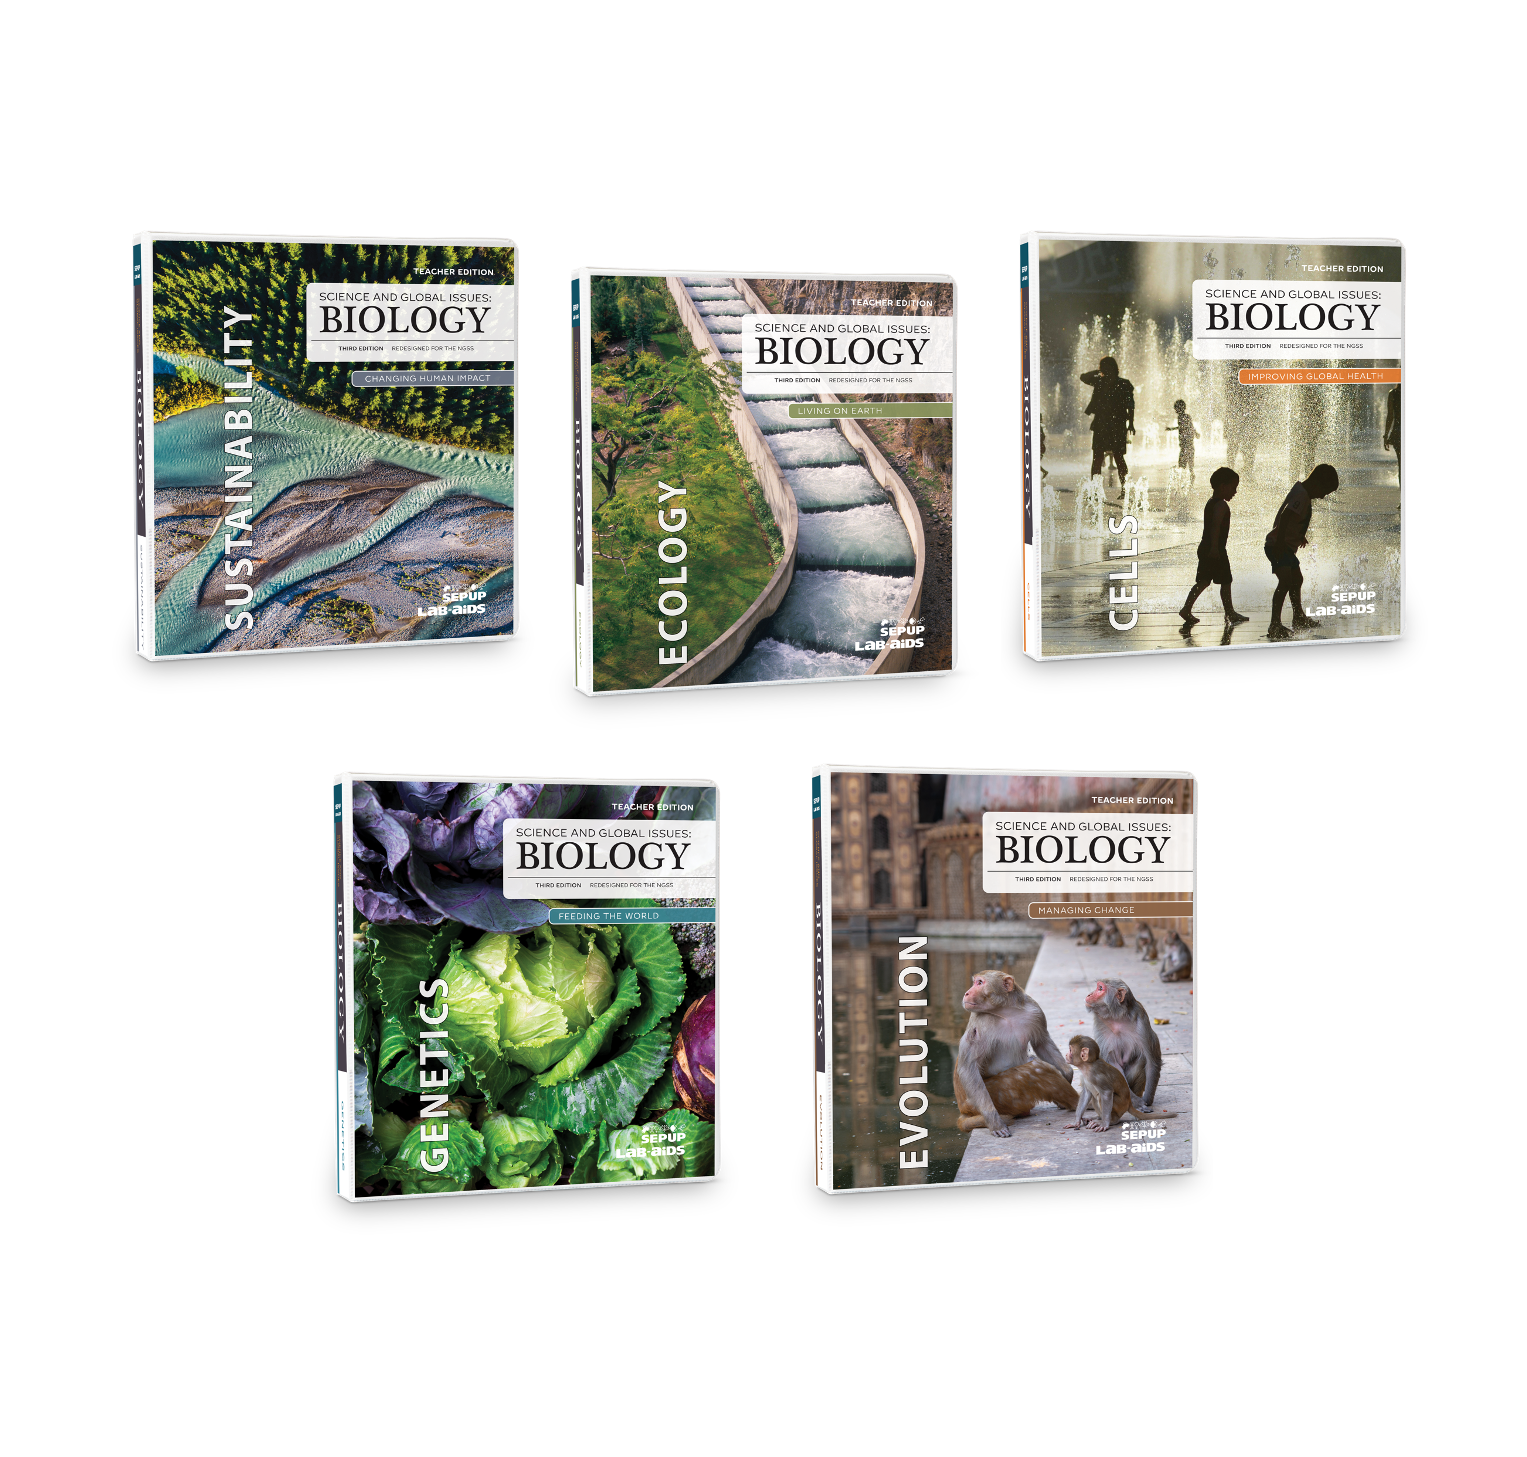 five, 3-ring binders with cover images for each of the units in Science and Global Issues: Biology, published by Lab-Aids